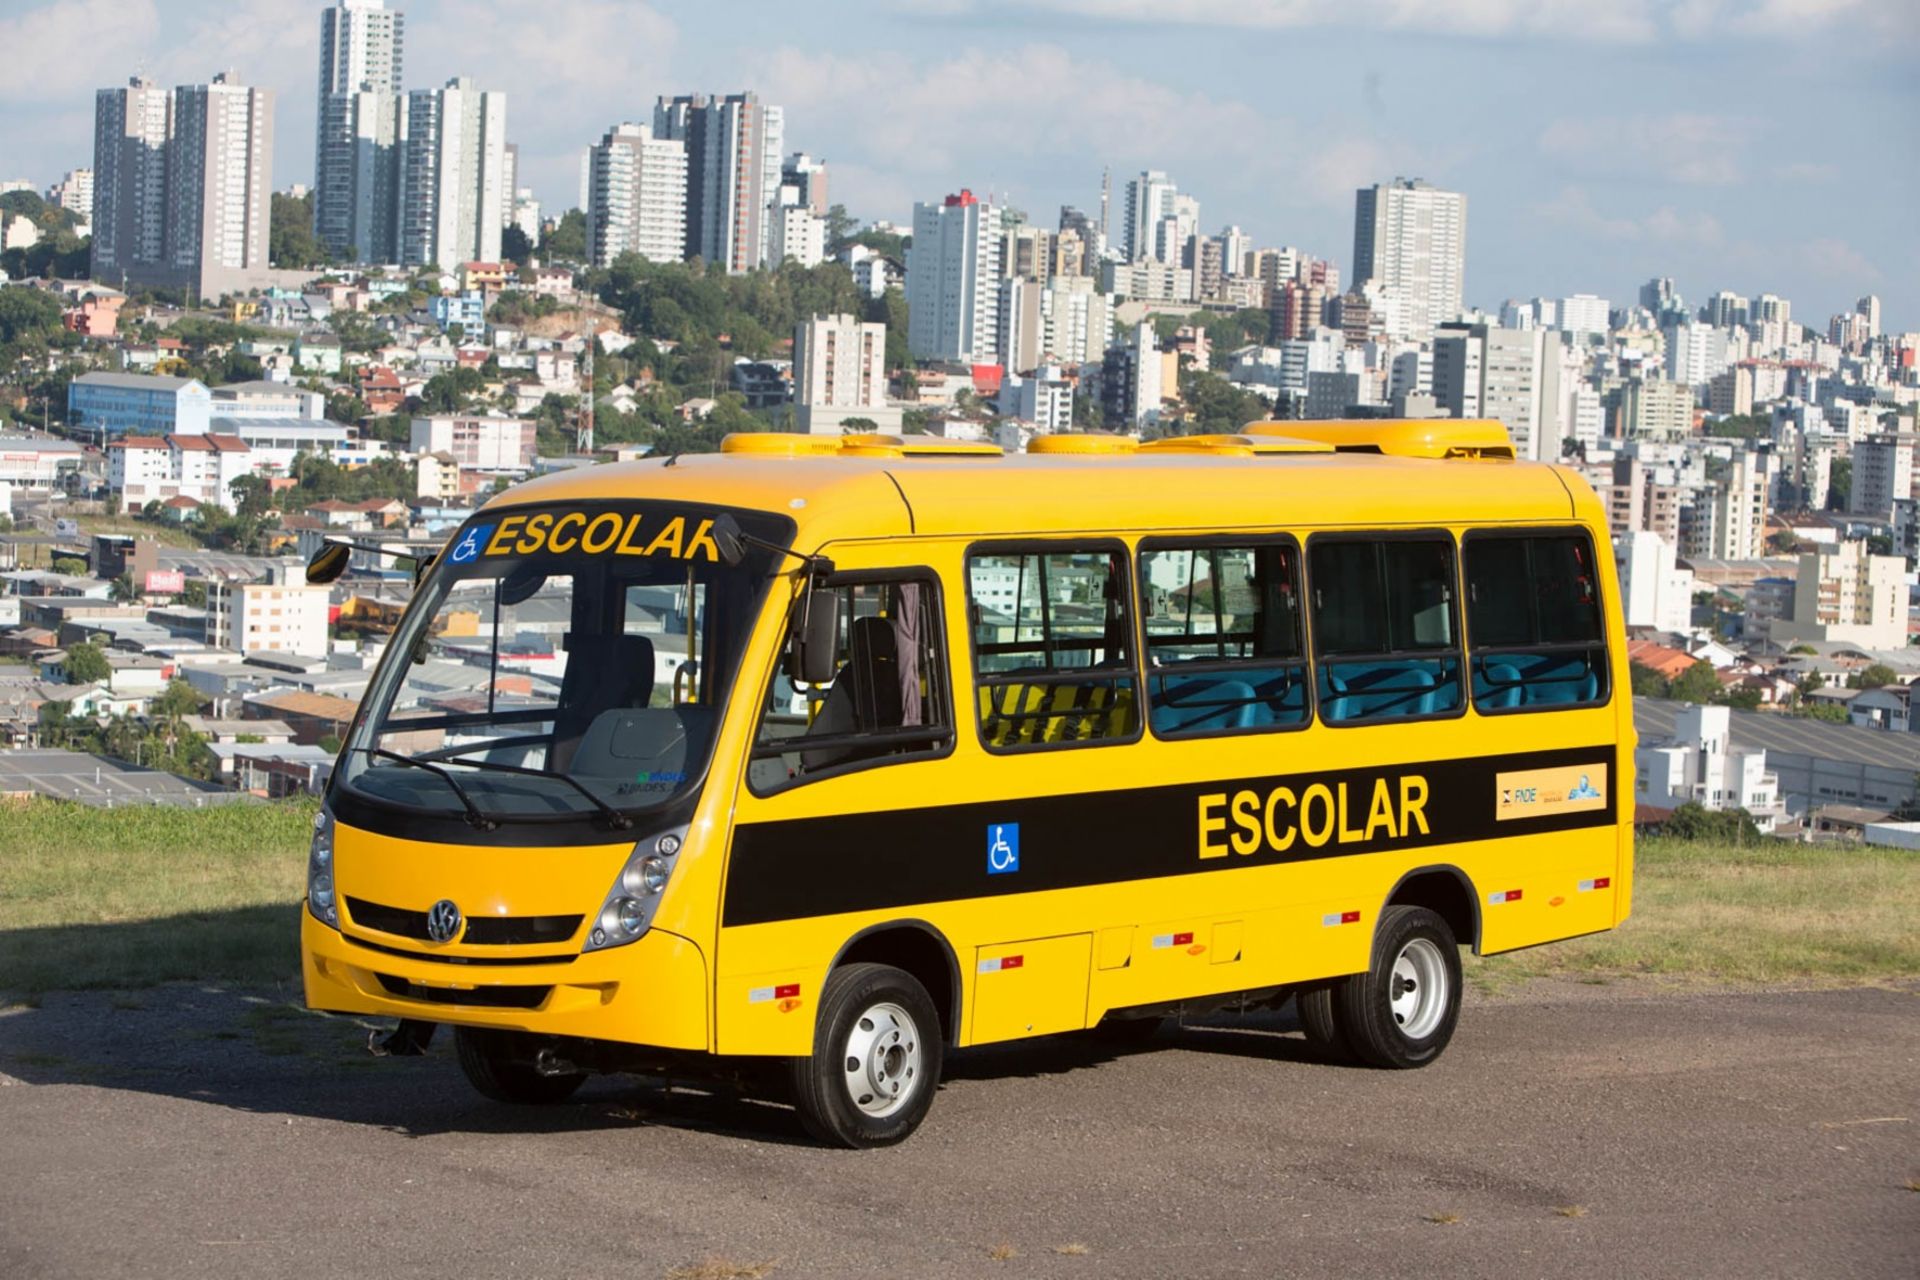 The Volksbus 8.160 ODR is the same model used in the Caminho da Escola (School Path) programme, whose success since its inception in 2007 has been tremendous; almost 18,000 VWCO vehicles transport around 4 million students to school each year.
                 